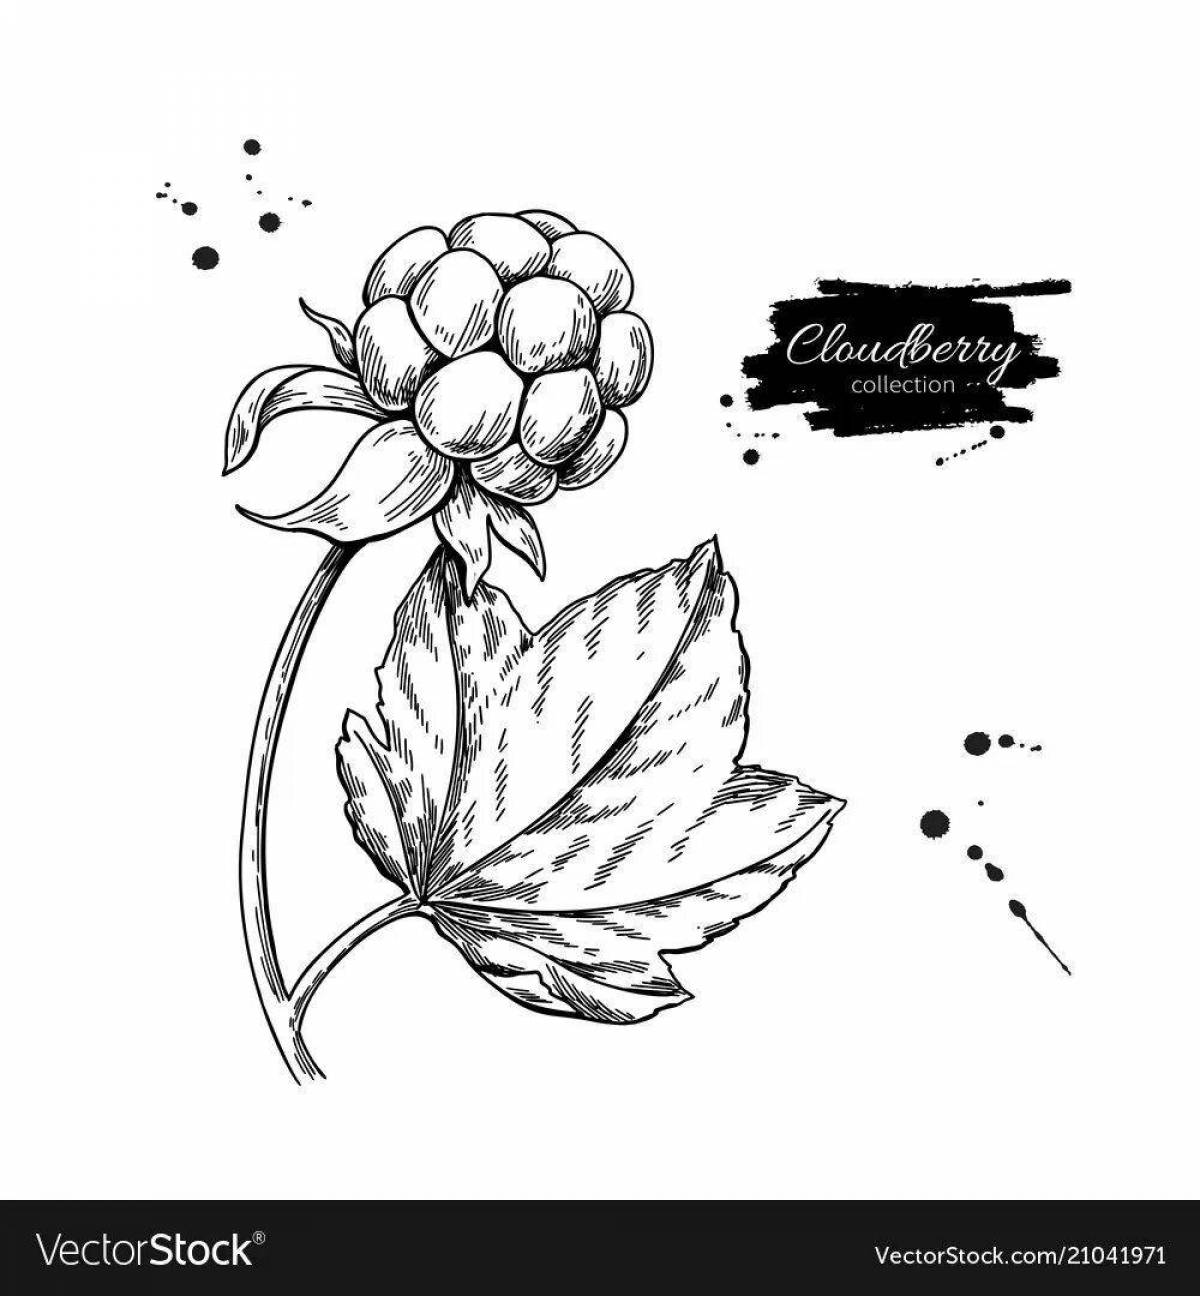 Delightful cloudberry coloring book for teens